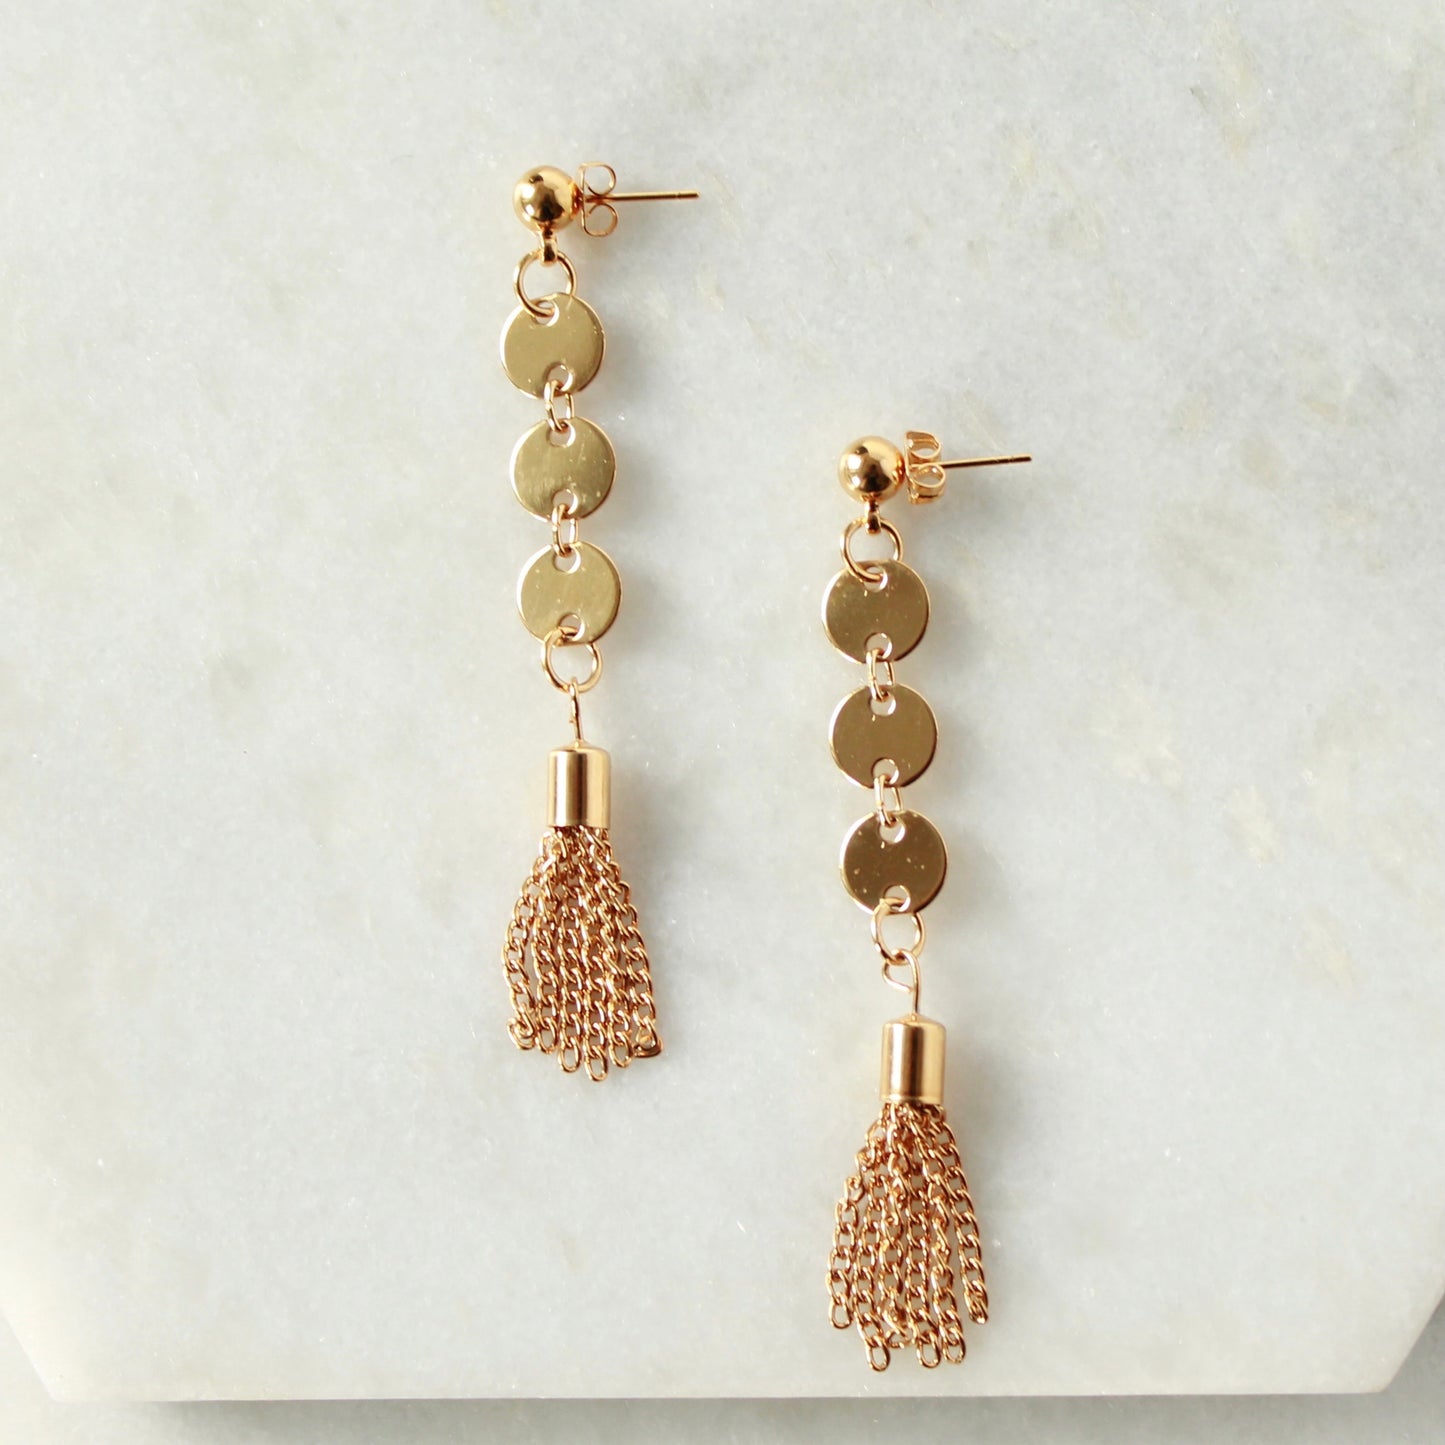 The Affluent Coin Earrings